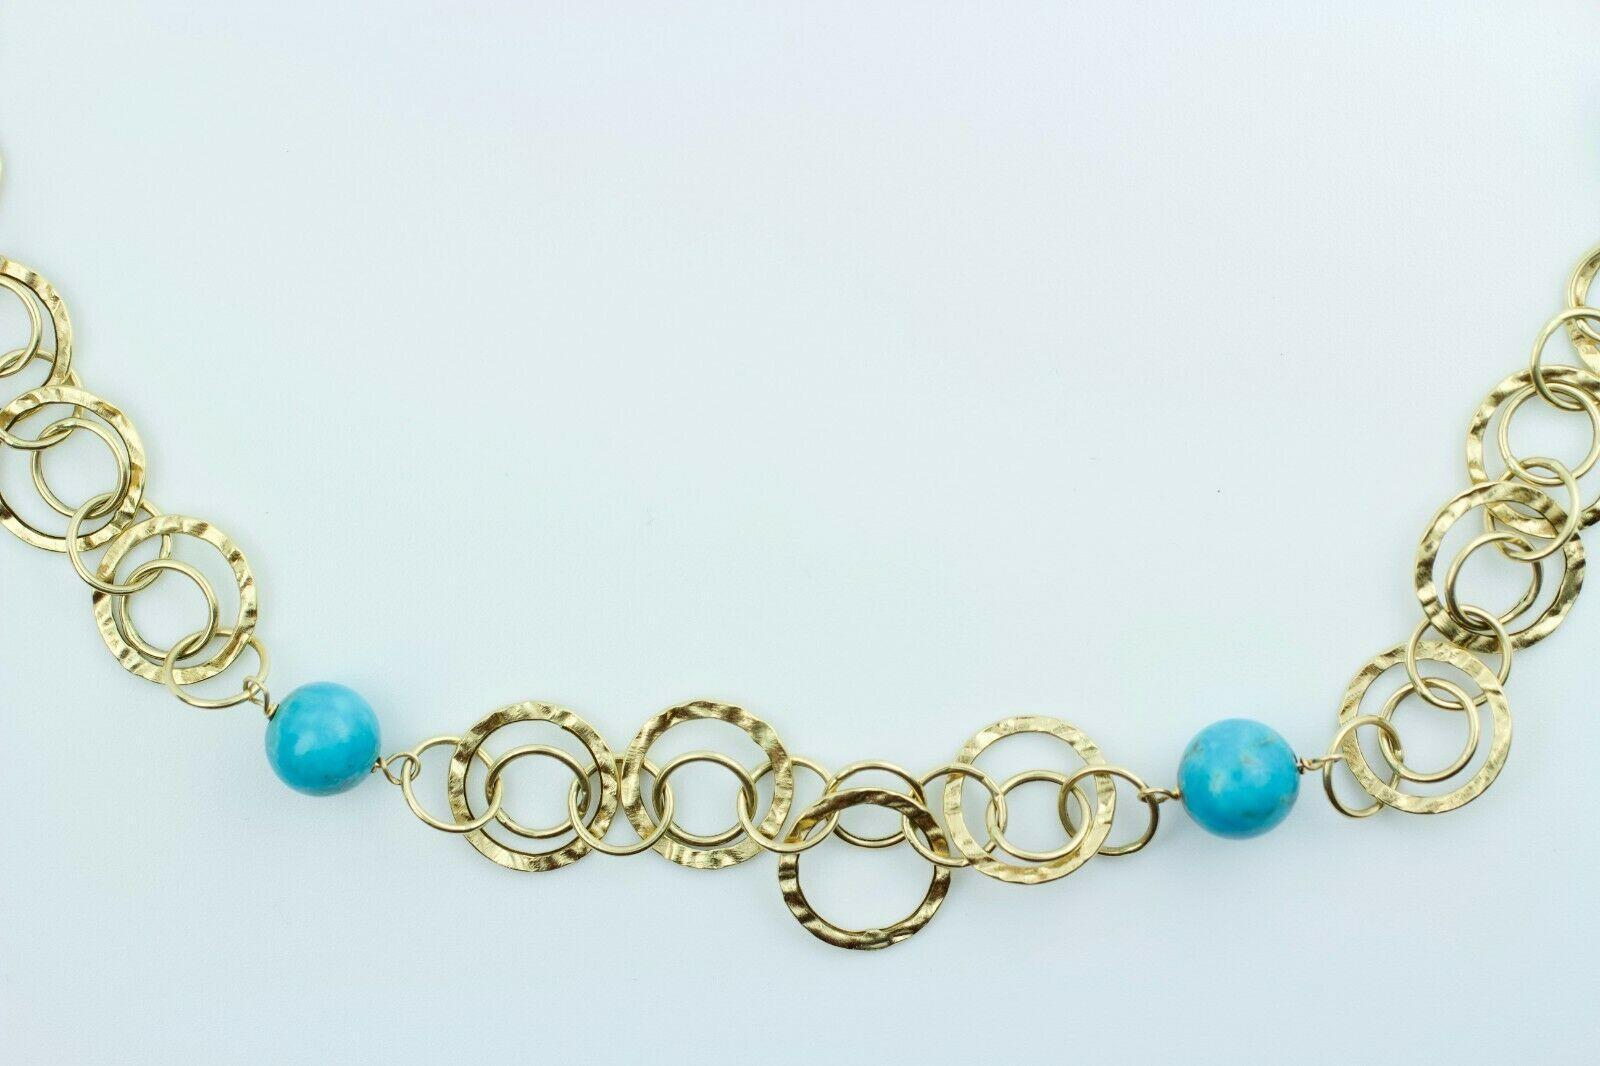 14k Yellow Gold Round Turquoise Ball Design Necklace 
9.3 Grams 
18 Inches Long 
6 Round Turquoise approx 8-8.25mm each
This is a beautiful turquoise necklace that is in great condition. If you have any questions or concerns please do not hesitate